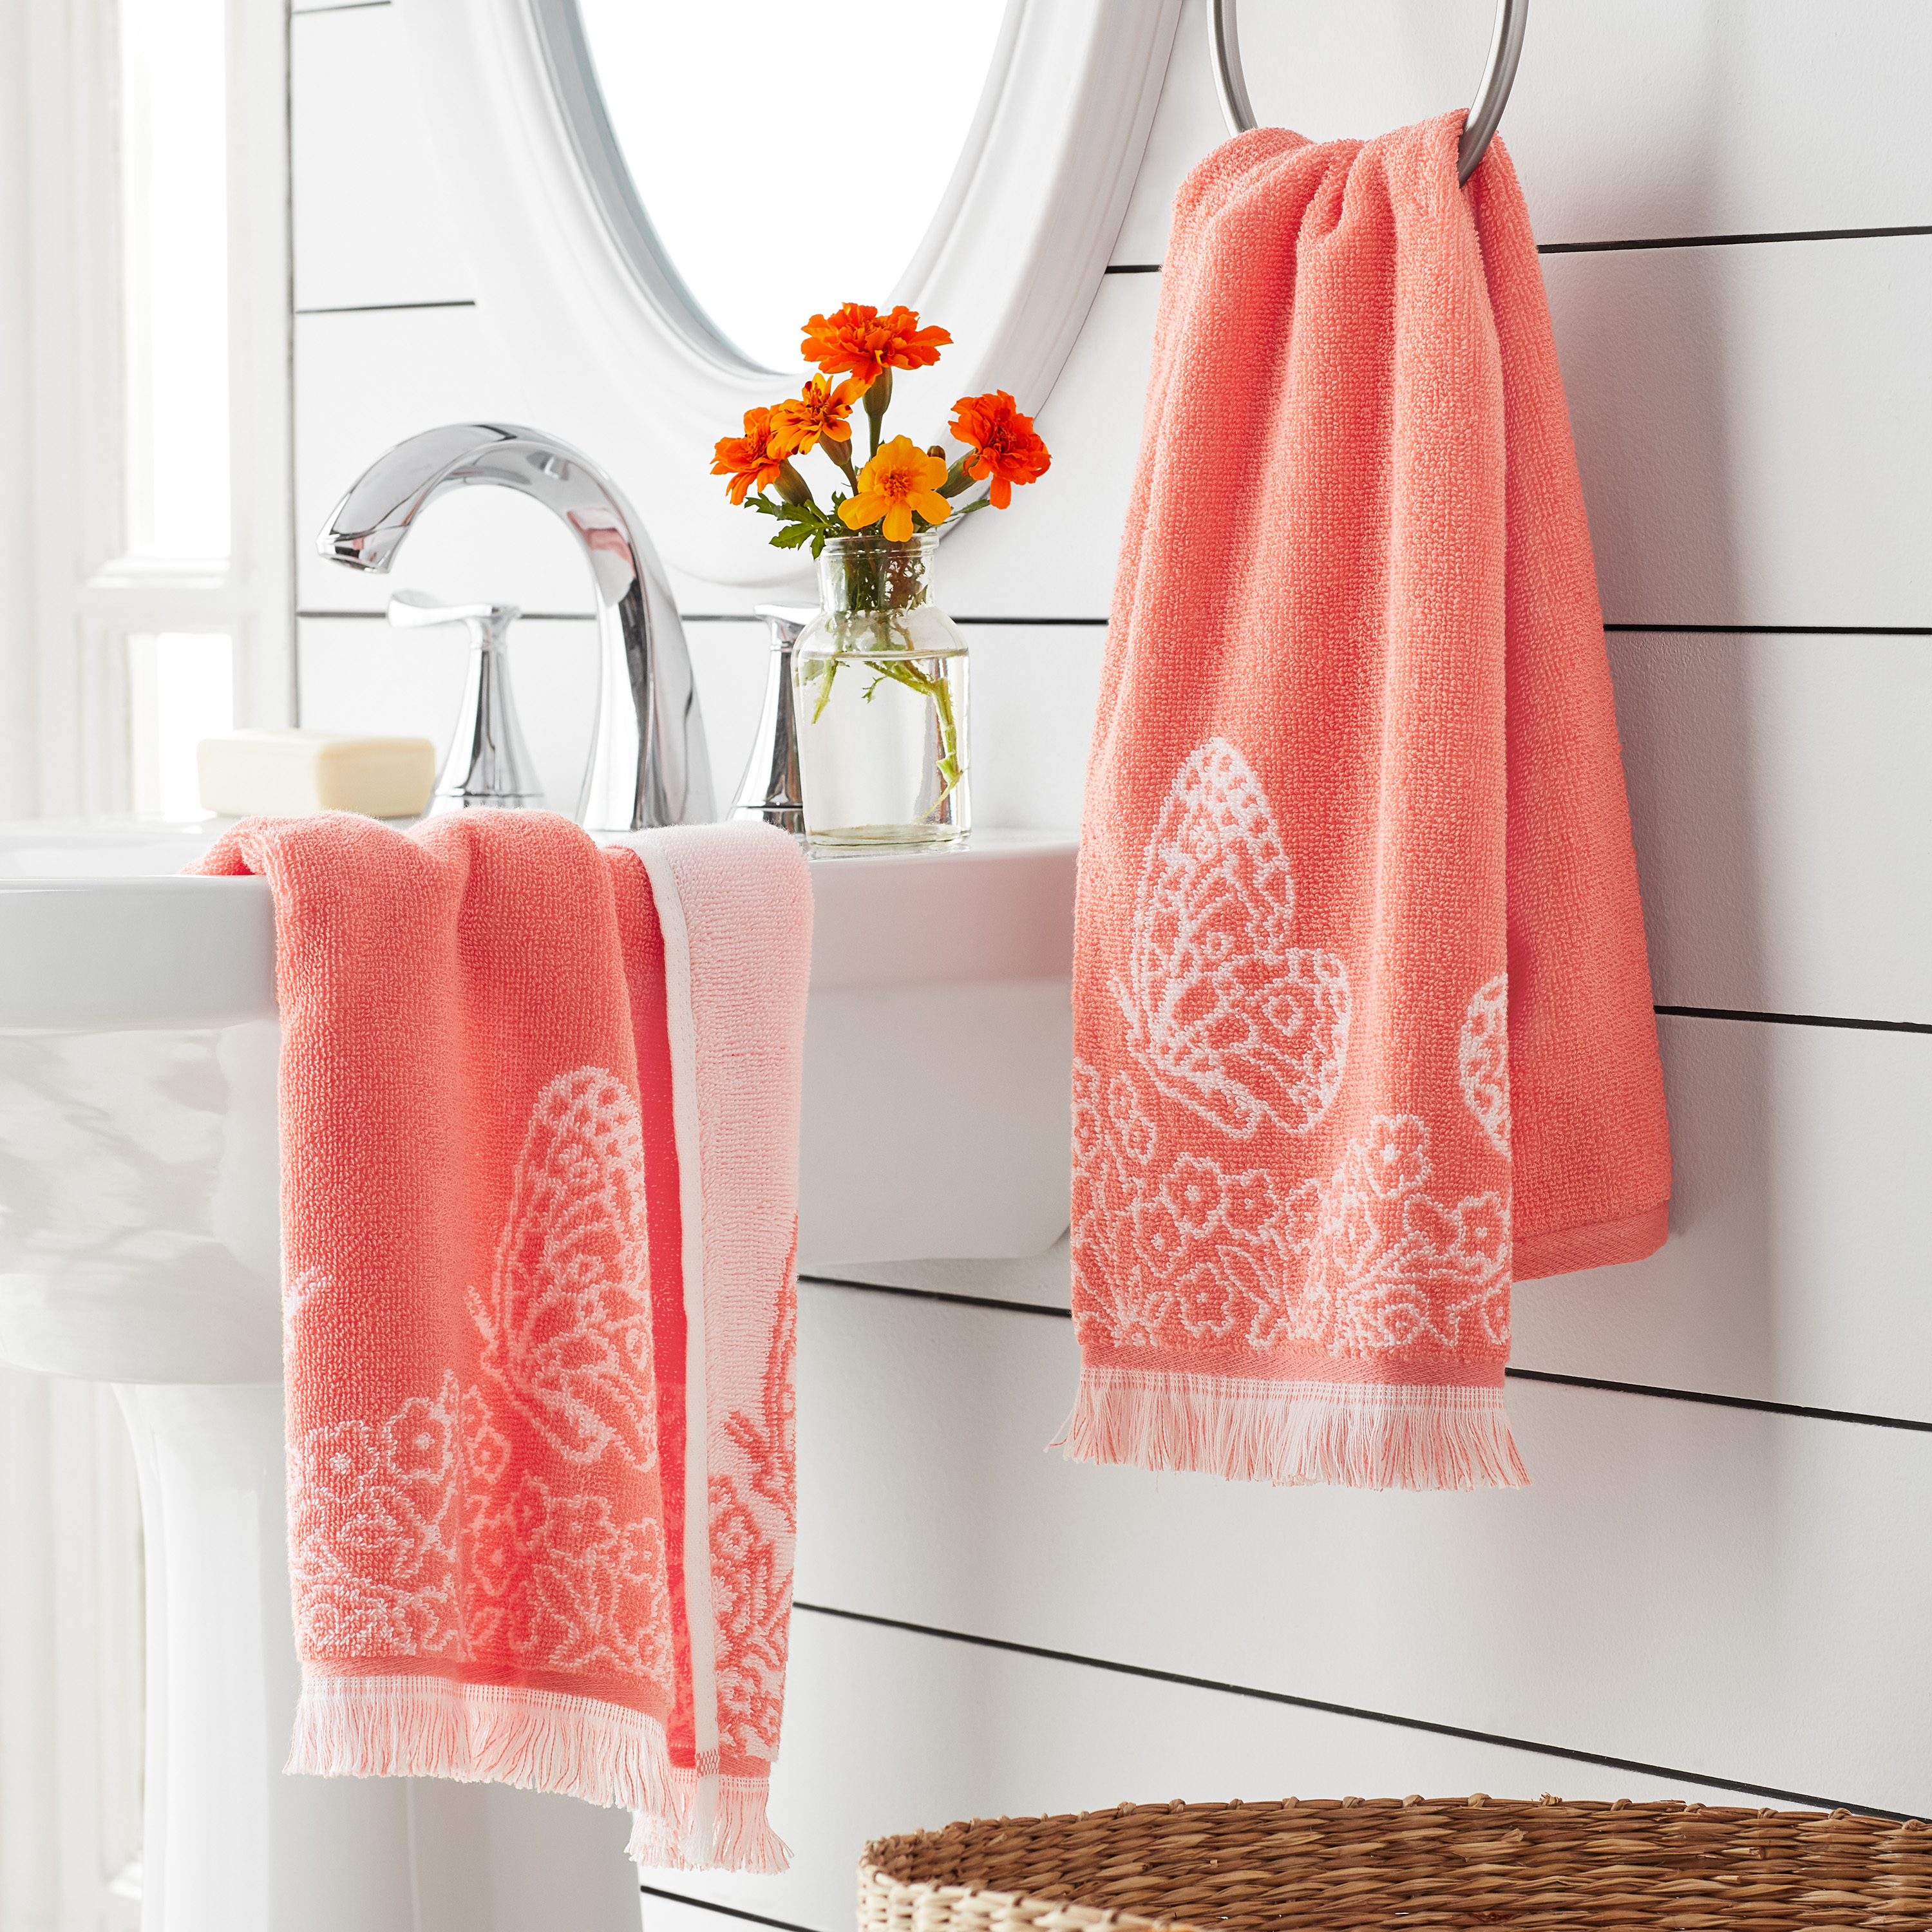 The Pioneer Woman Butterfly Garden 2-Pack Cotton Hand Towel Set, Coral Bell - image 3 of 5